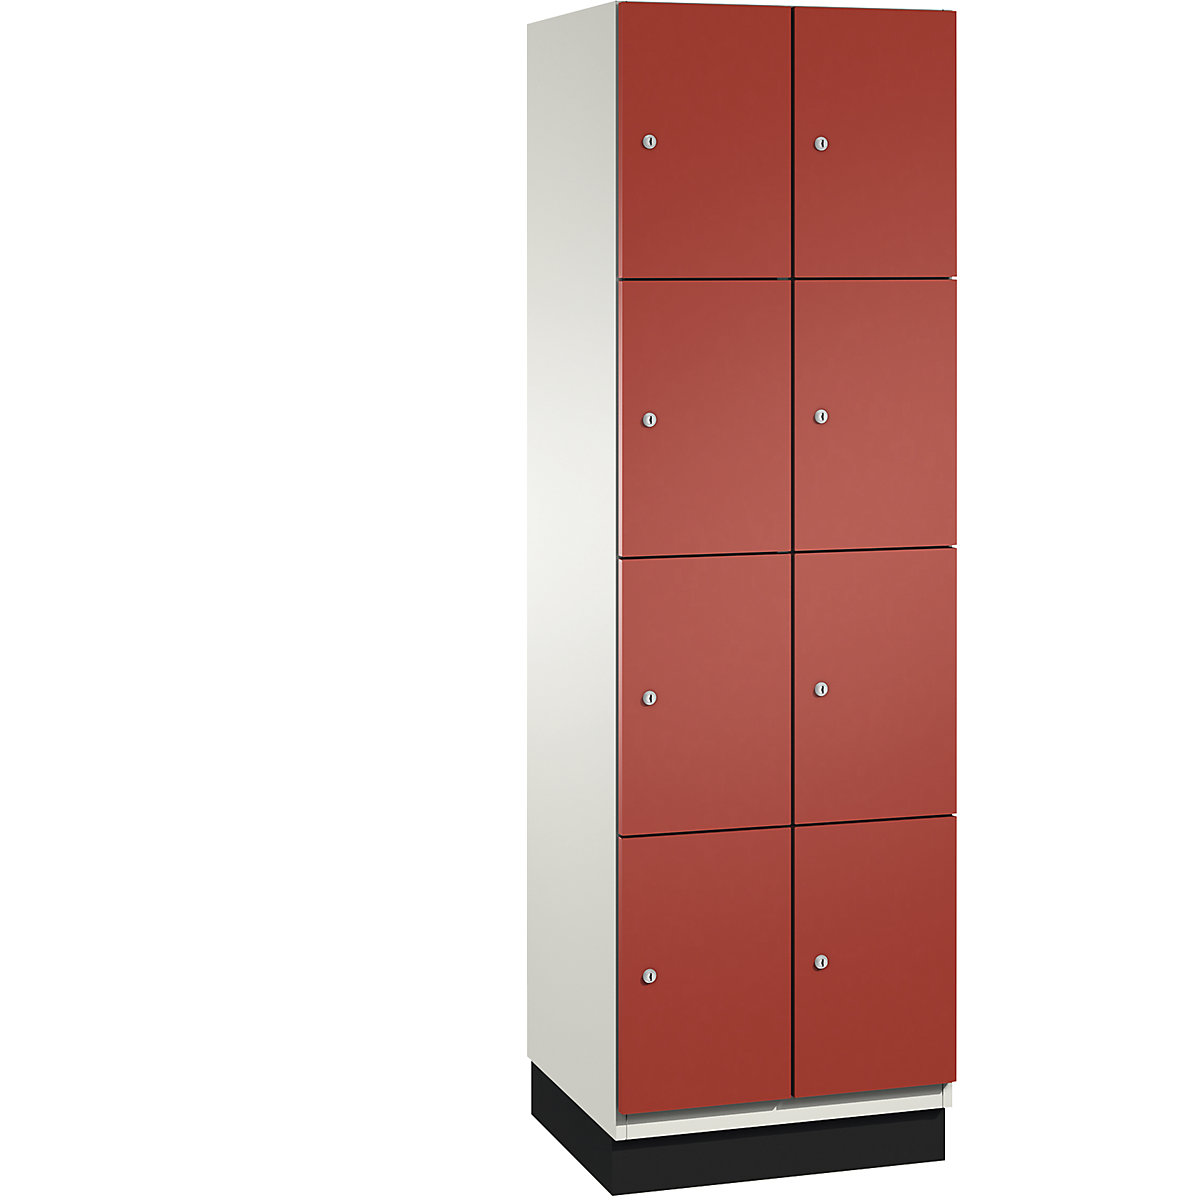 CAMBIO compartment locker with sheet steel doors – C+P, 8 compartments, width 600 mm, body pure white / door flame red-2